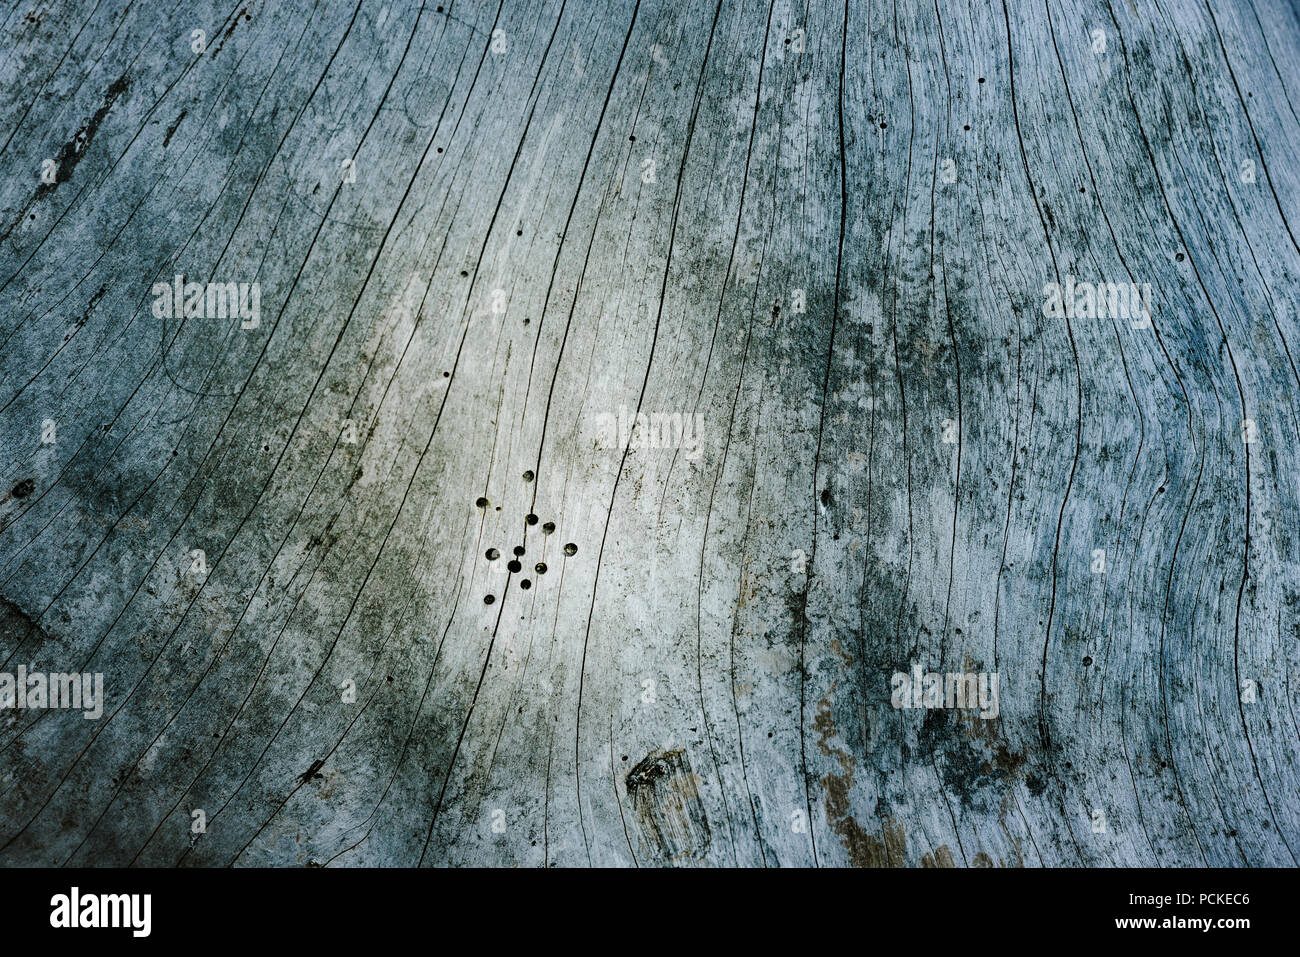 dry dead wood with wormholes and patterns Stock Photo